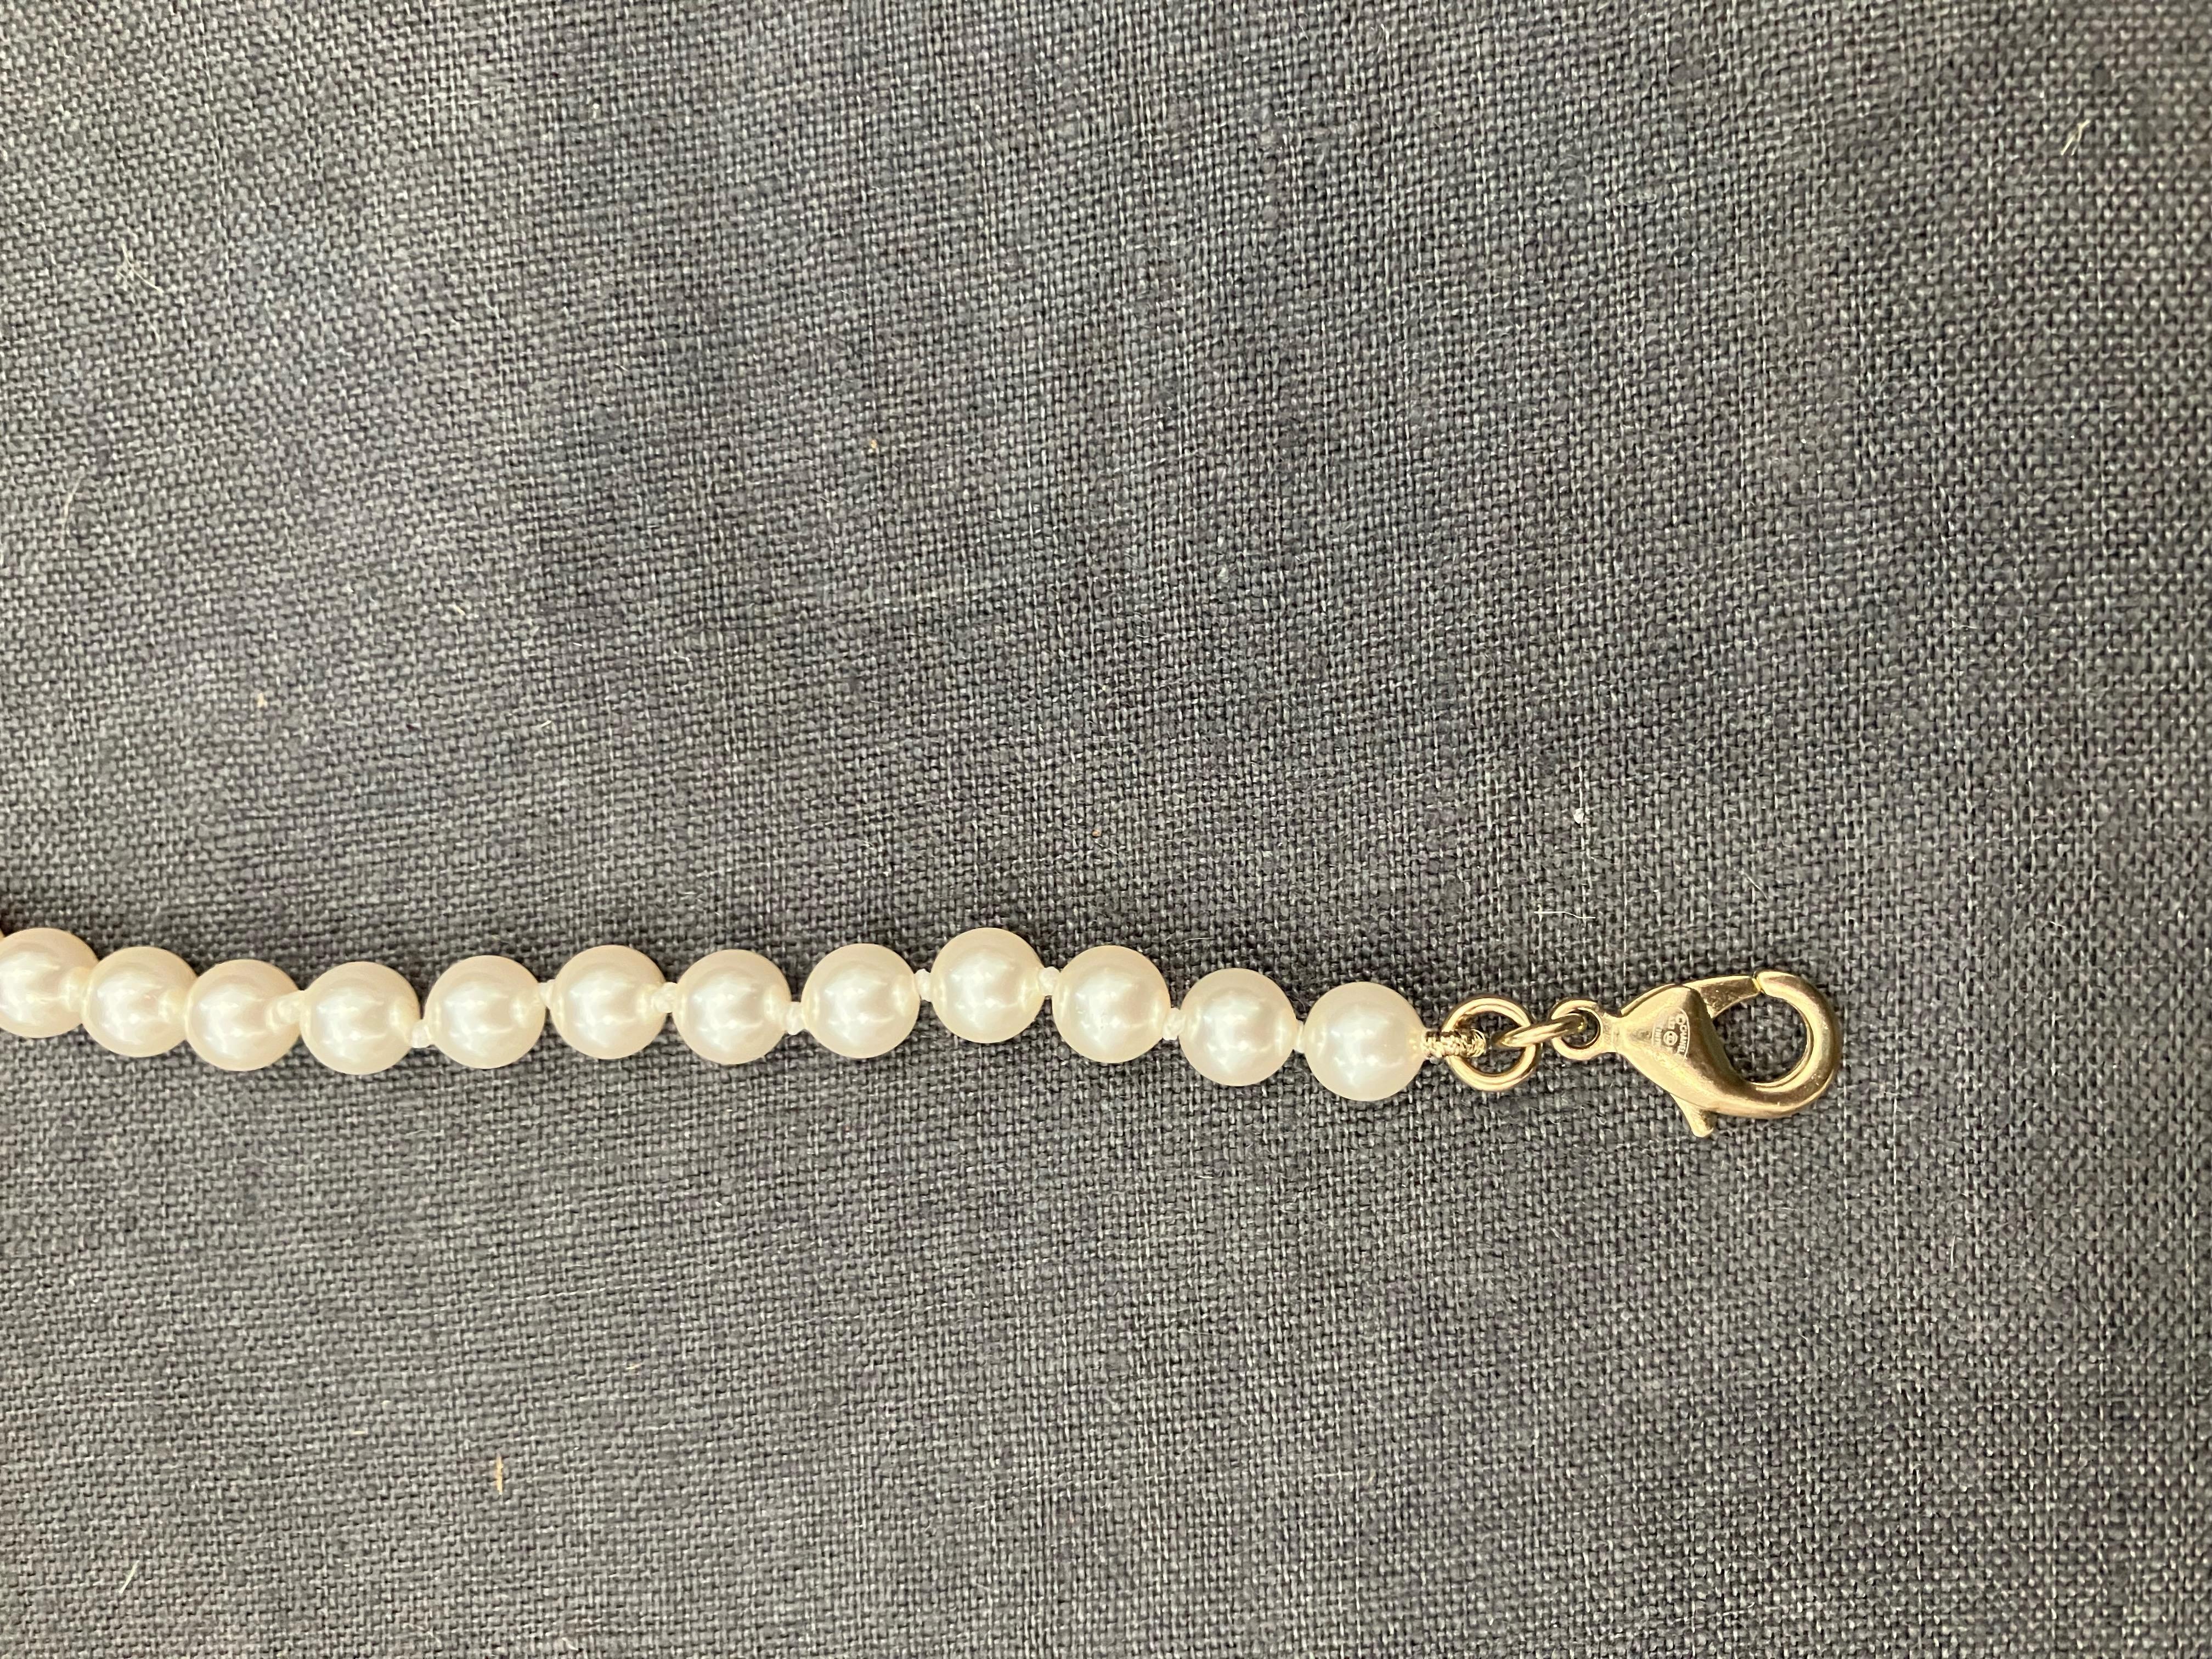 Chanel Iconic Faux Pearls Logo Necklace For Sale 2